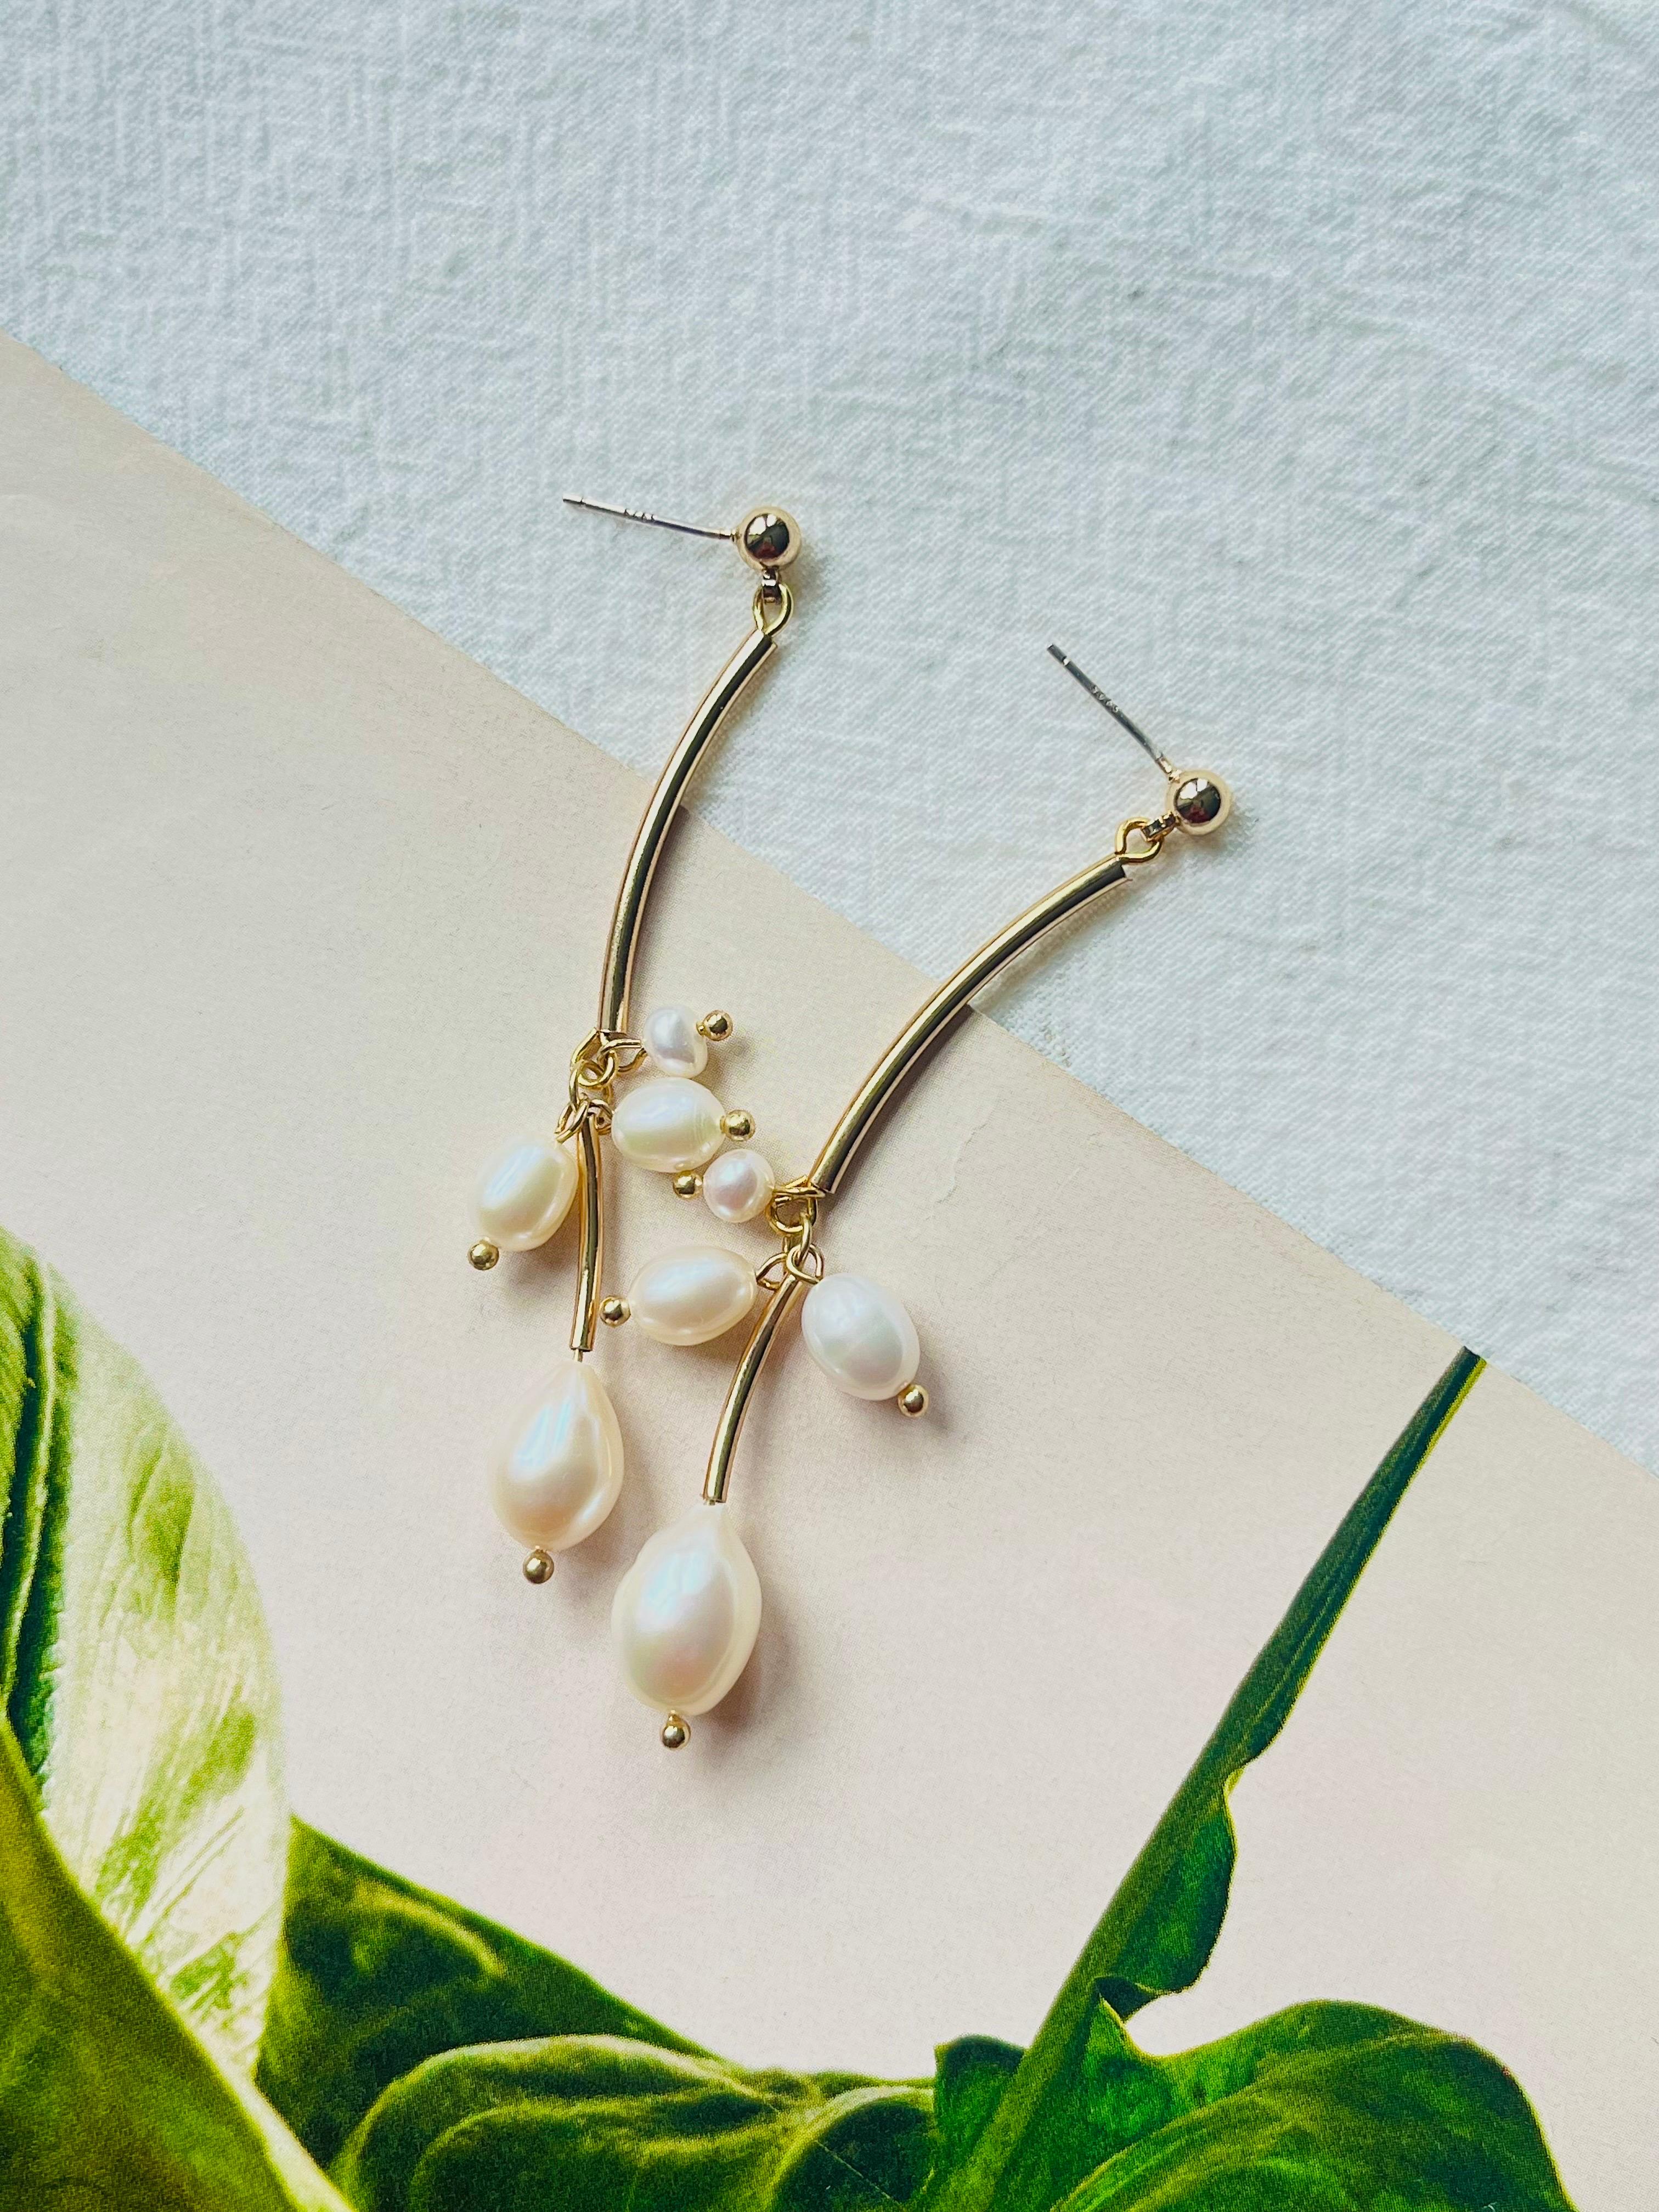 White Oval Cluster Pearls Curled Long Drop Dangle Elegant Pierced Earrings, Gold Tone, Swarovski Element

100% handmade. Natural pearls, each one is different. Excellent gift for lady. High cost and quality.

Material: Pearls, Gold plated